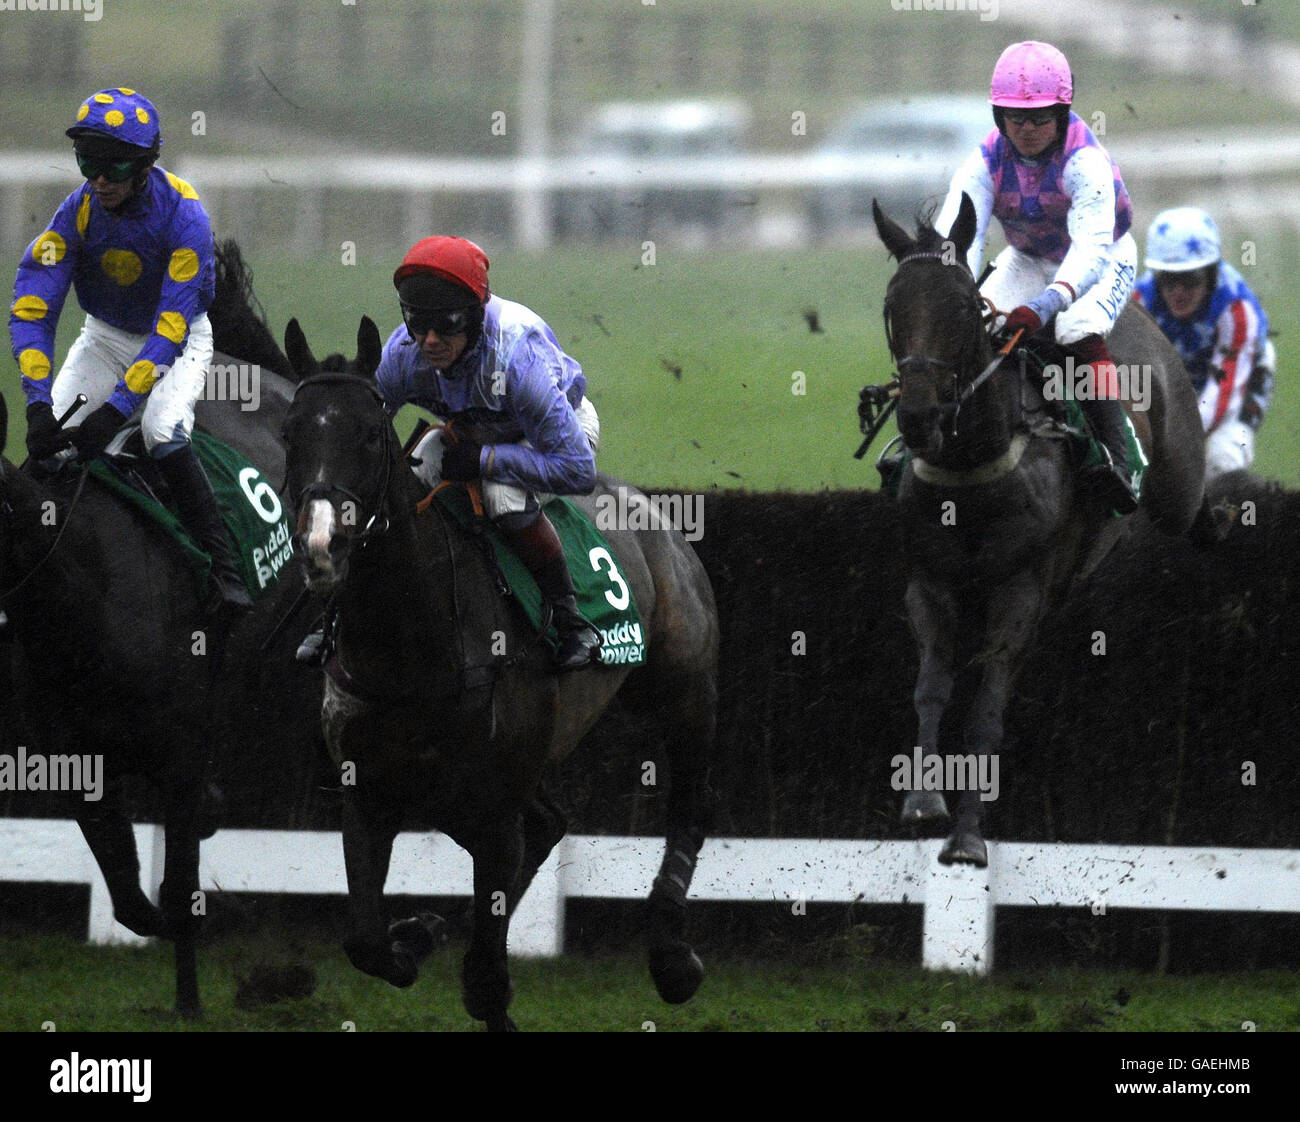 Kalca Mome ridden by Richard Johnson (centre) gets away from the second fence on their way to winning the Paddypower.com Handicap Chase at Cheltenham Racecourse. Stock Photo